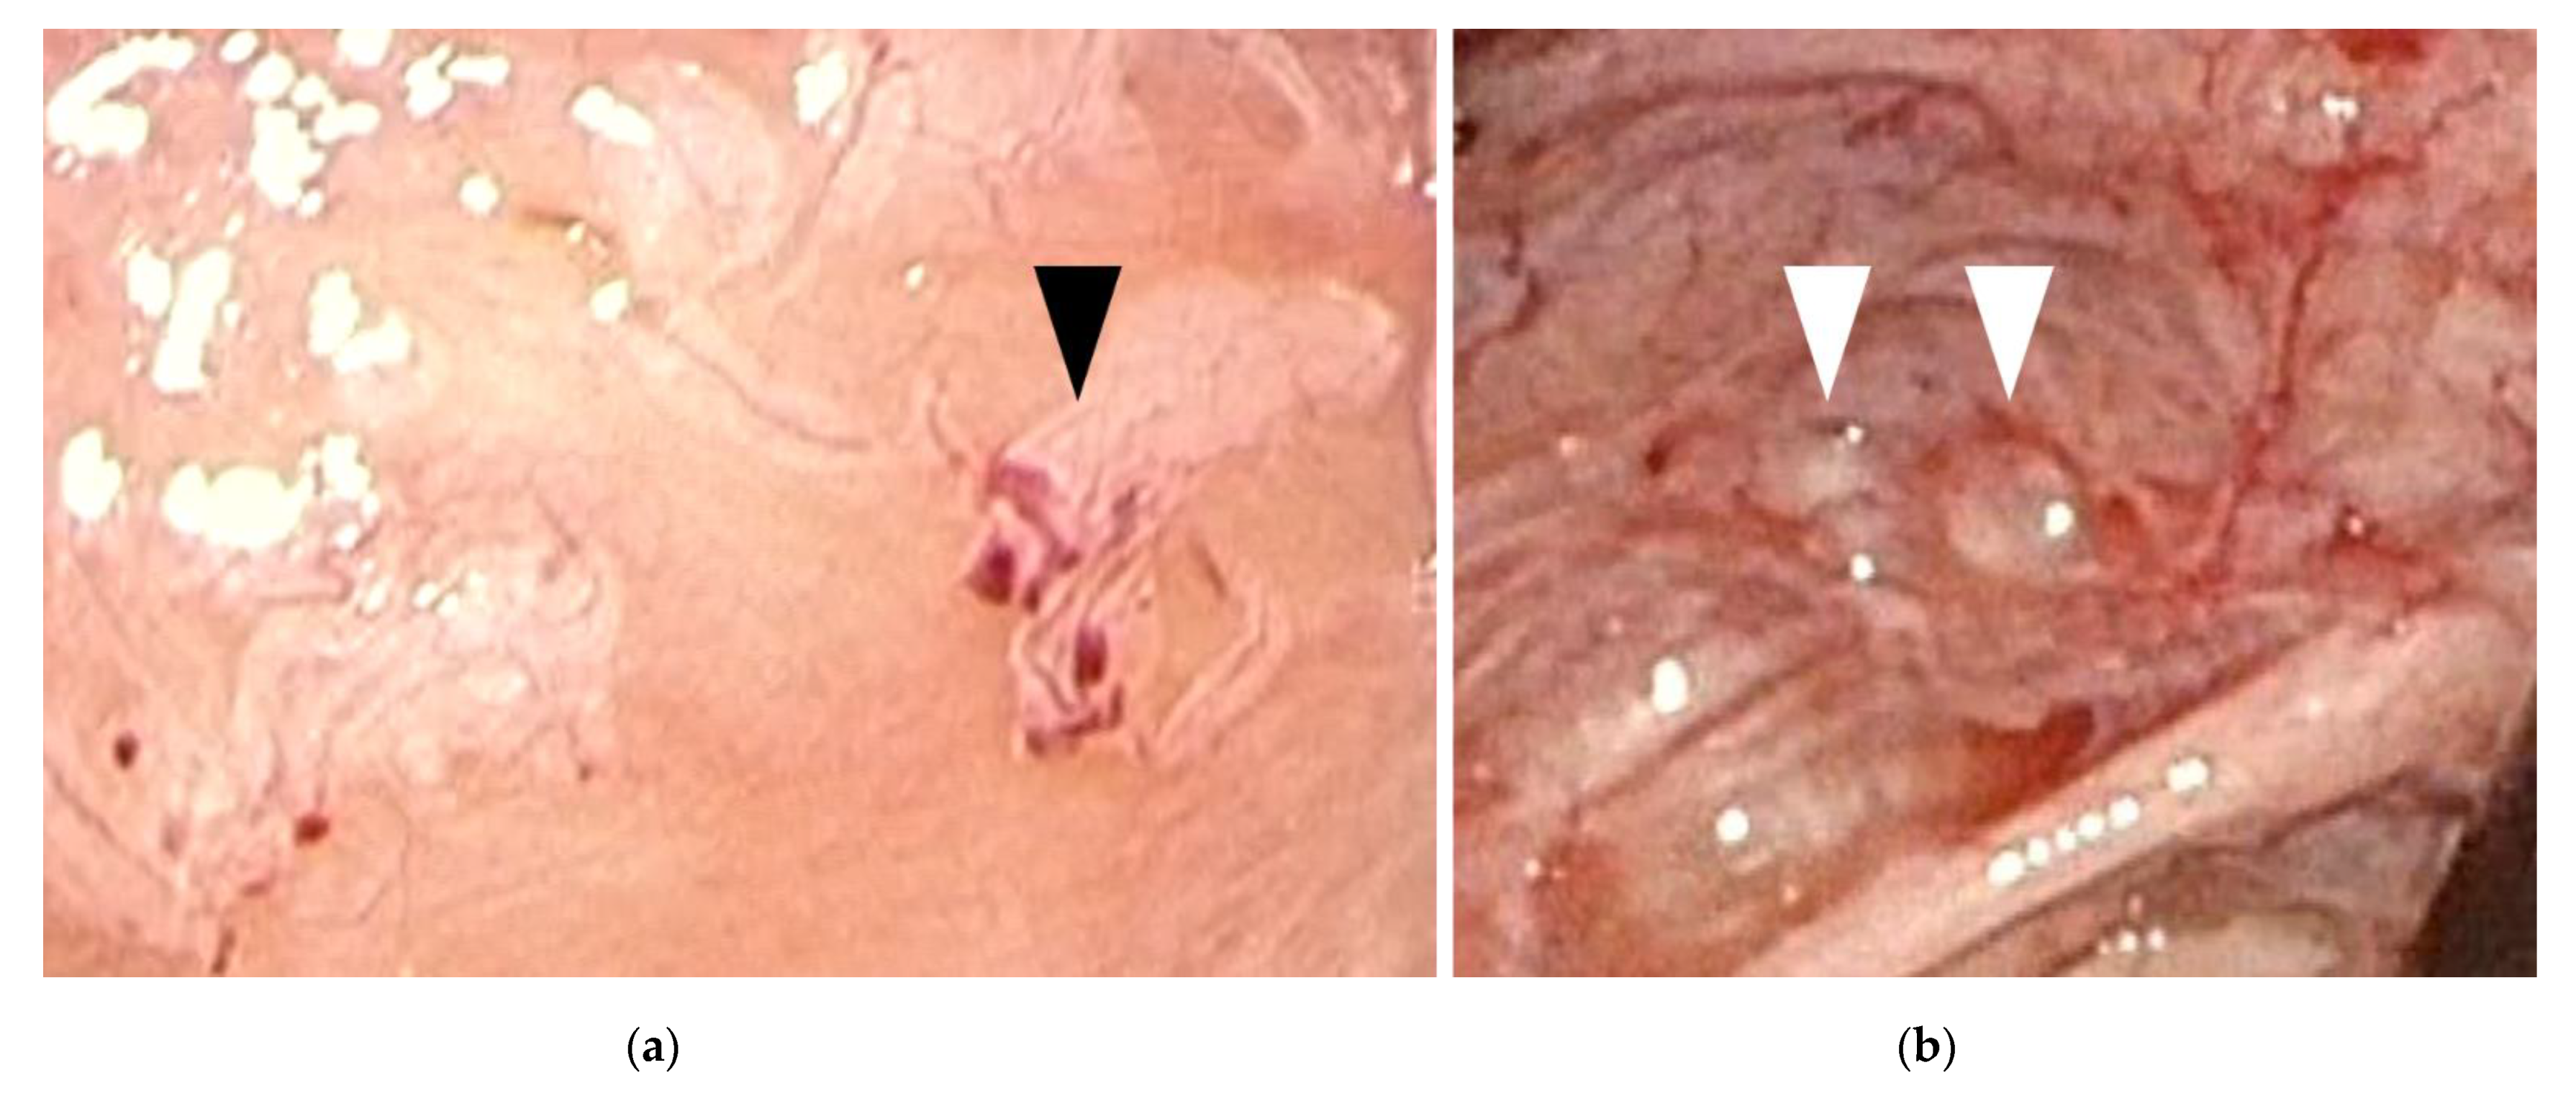 An 11-year-old girl with biopsy-proven juvenile (virginal) breast